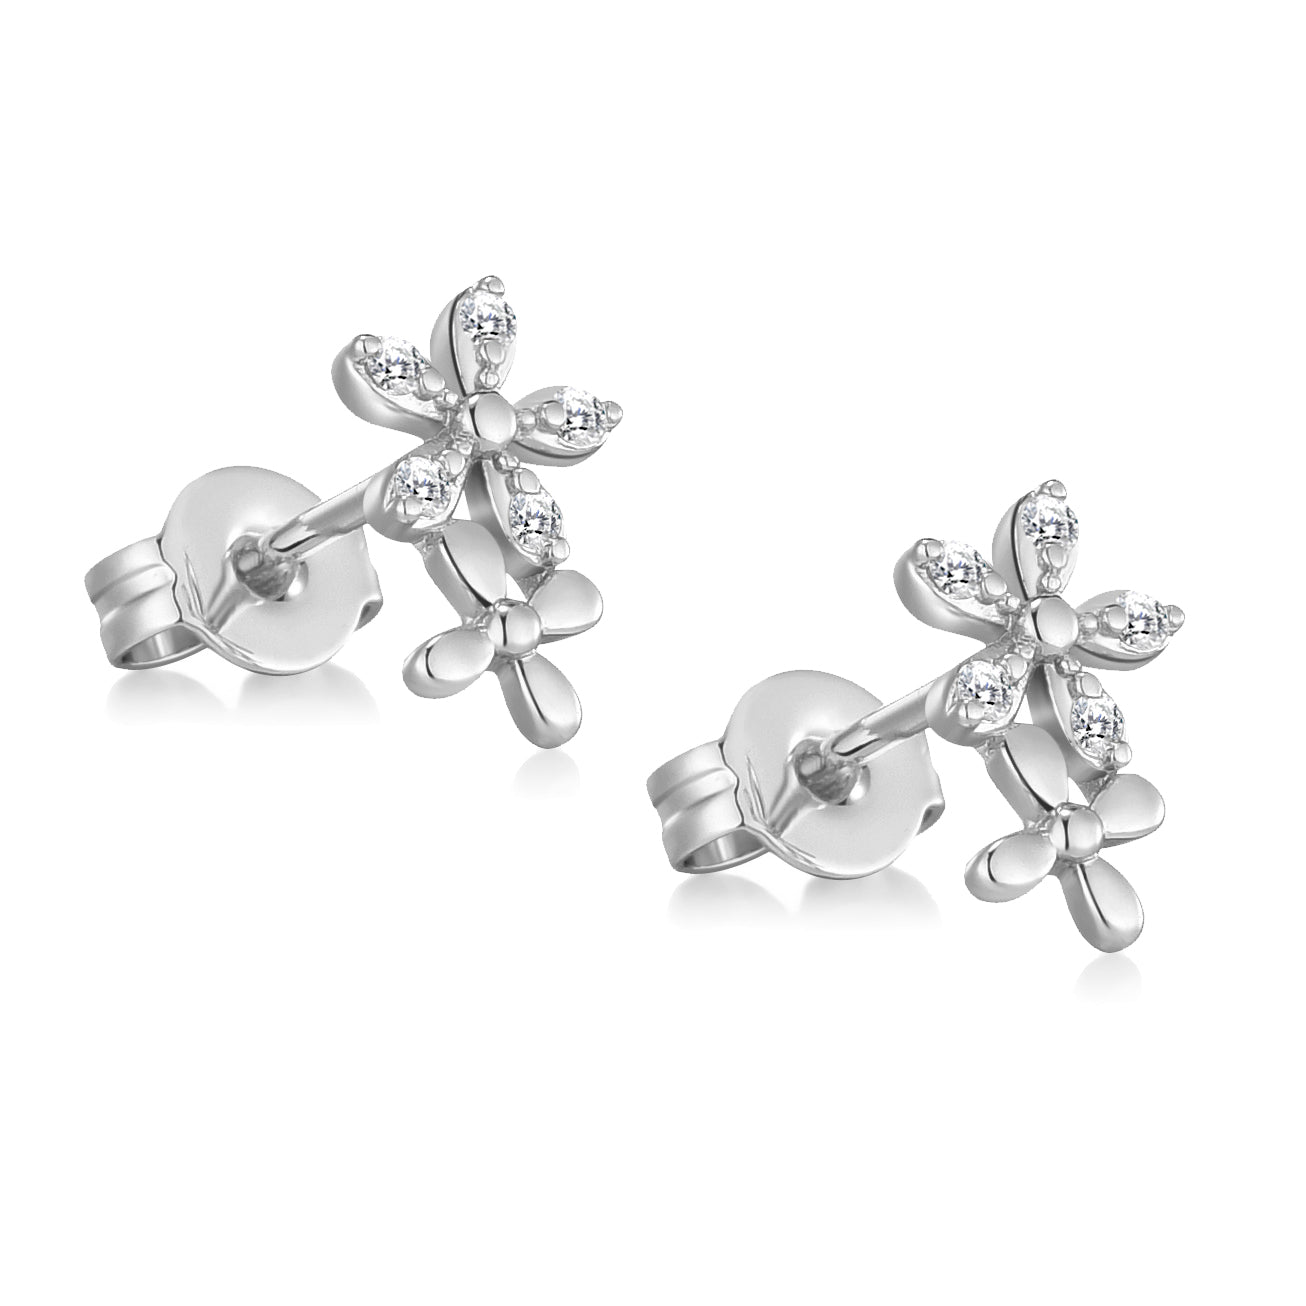 Silver Plated Flower Earrings Created with Zircondia® Crystals by Philip Jones Jewellery